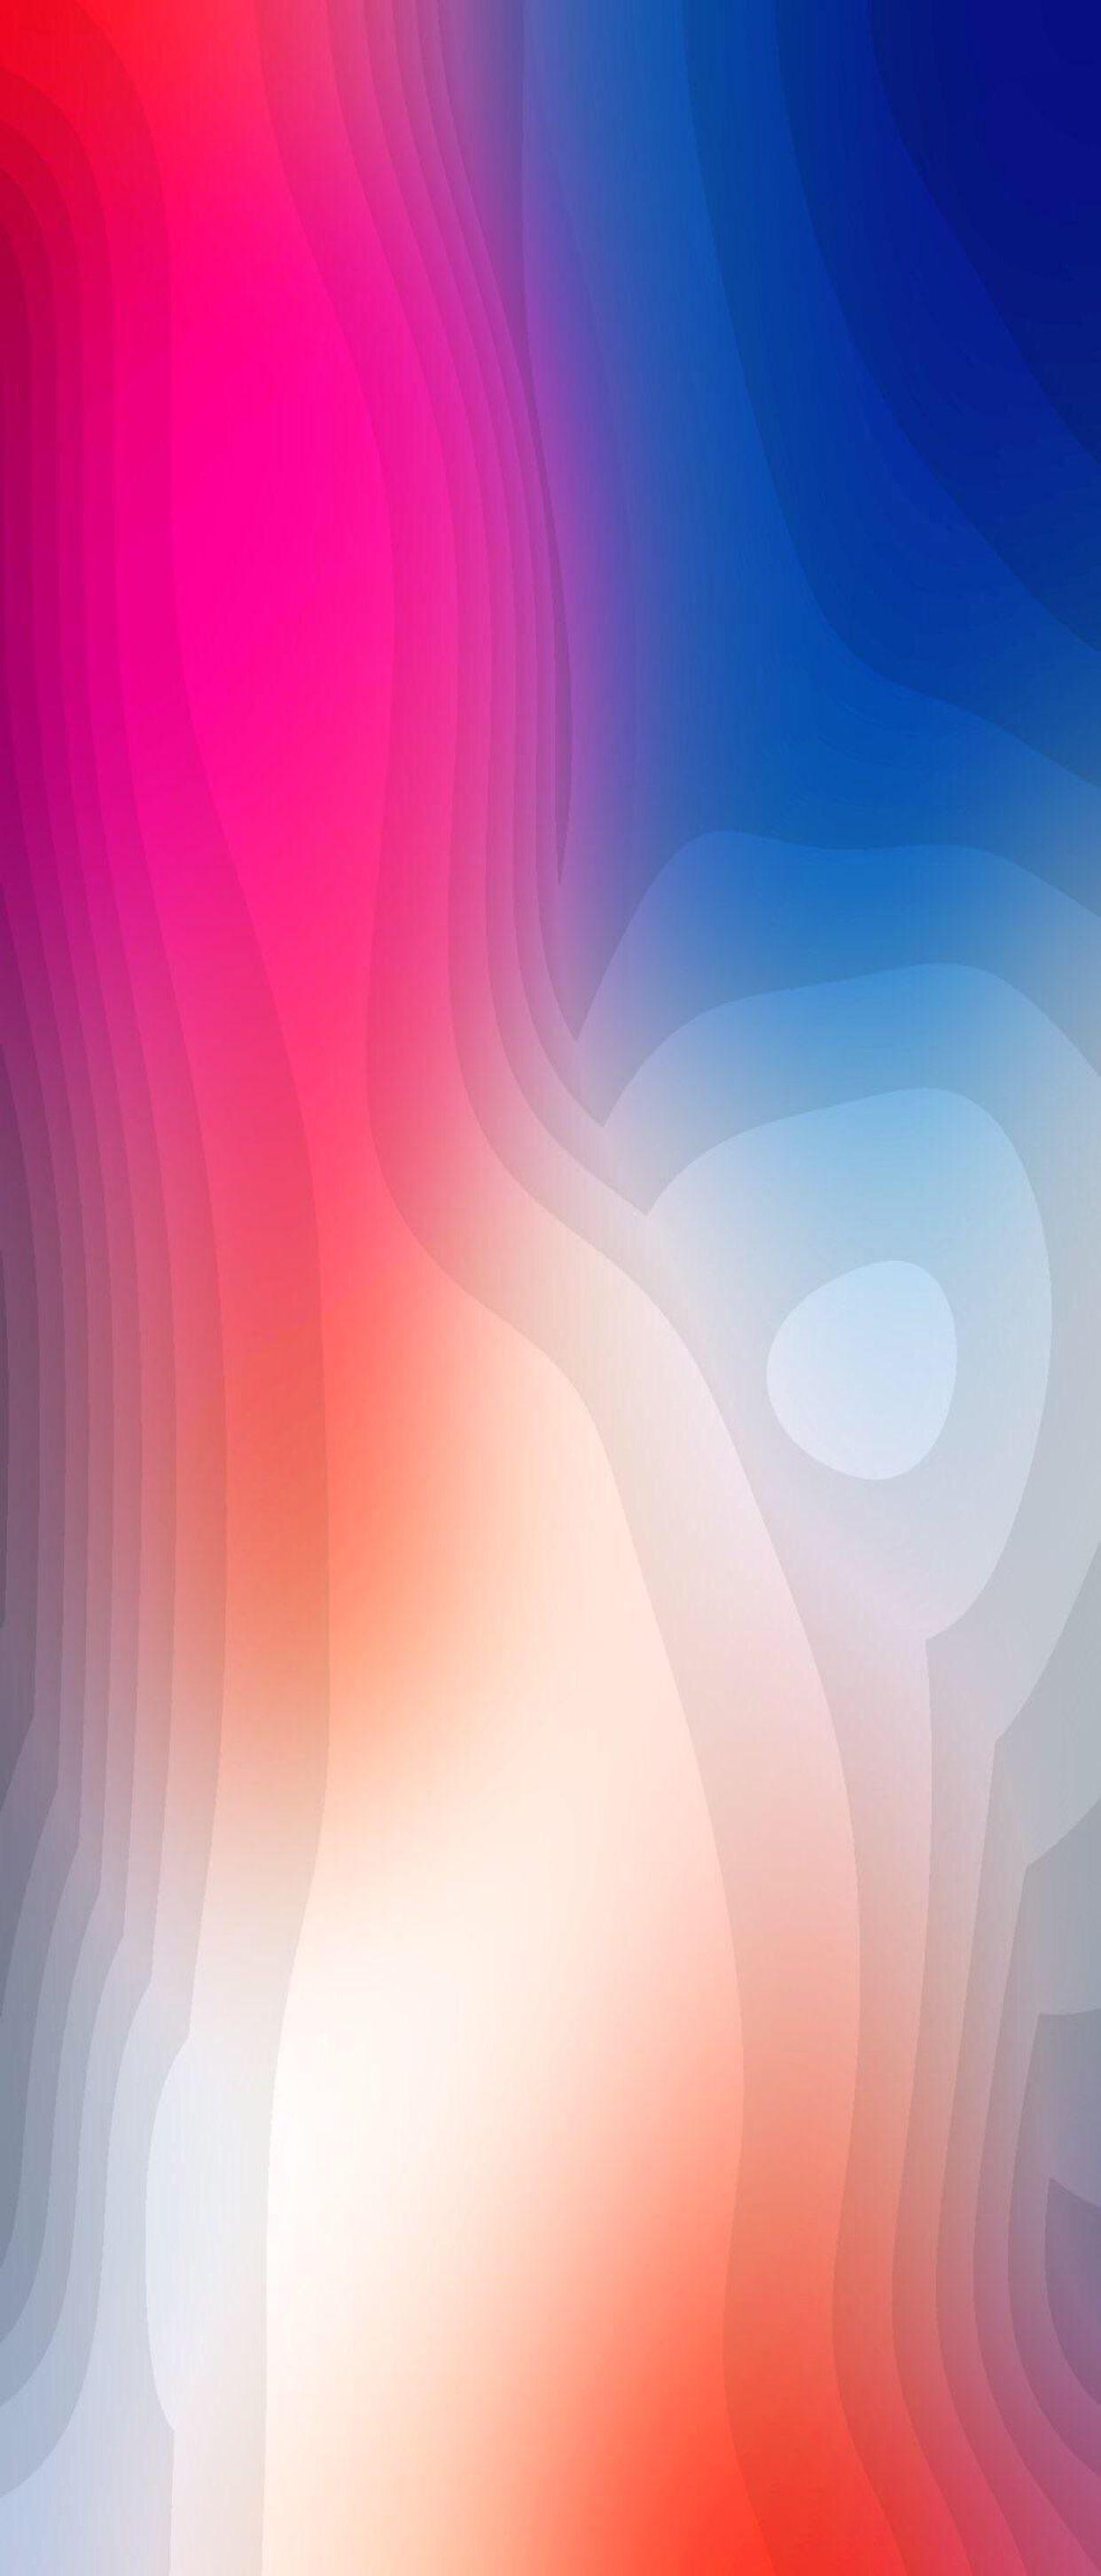 blue, pink, violet, wallpaper, pattern, galaxy, colour, abstract